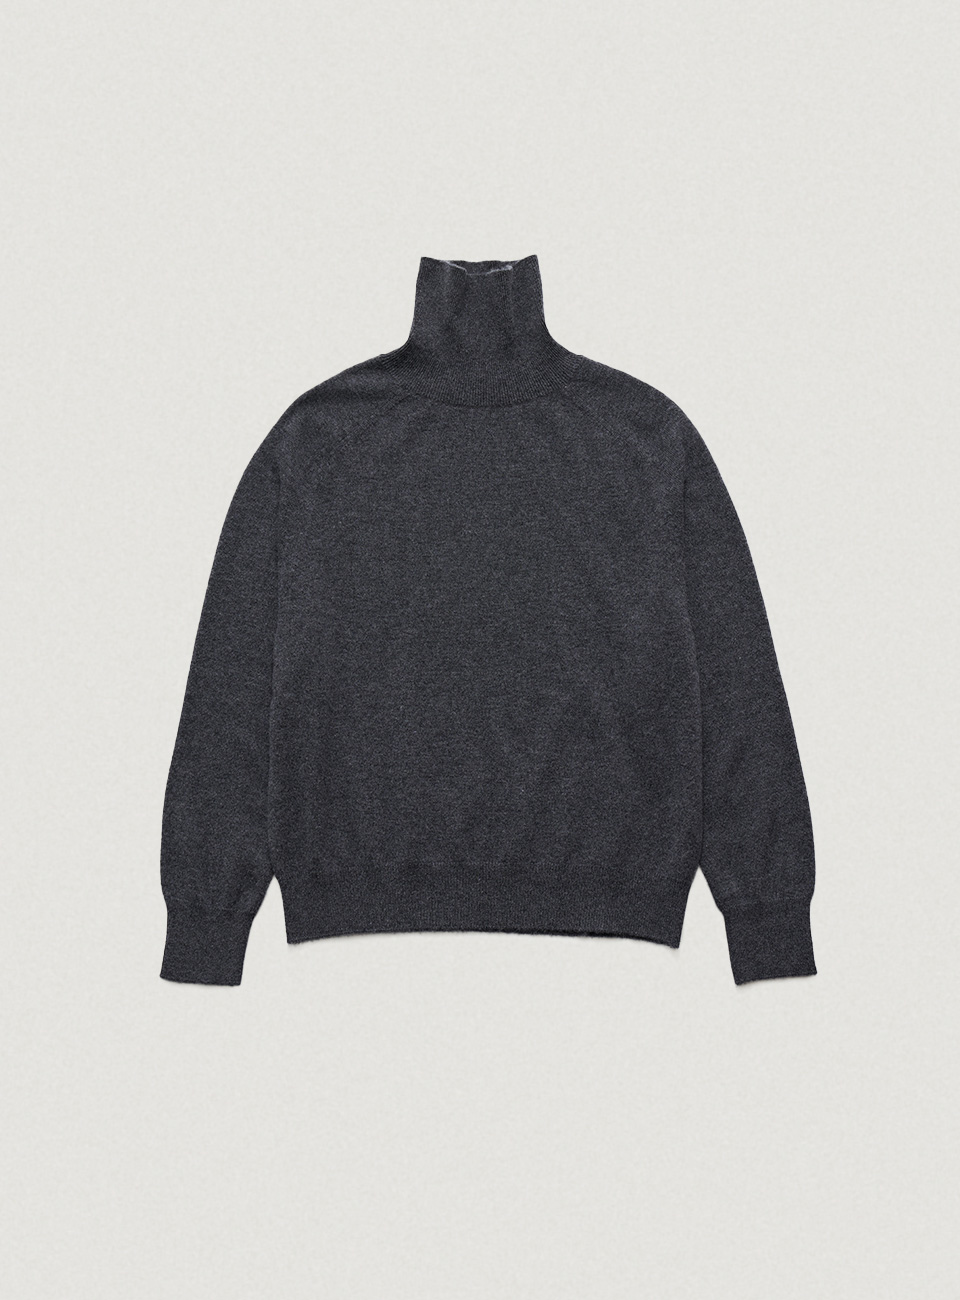 Charcoal Days Turtleneck Knit Sweater